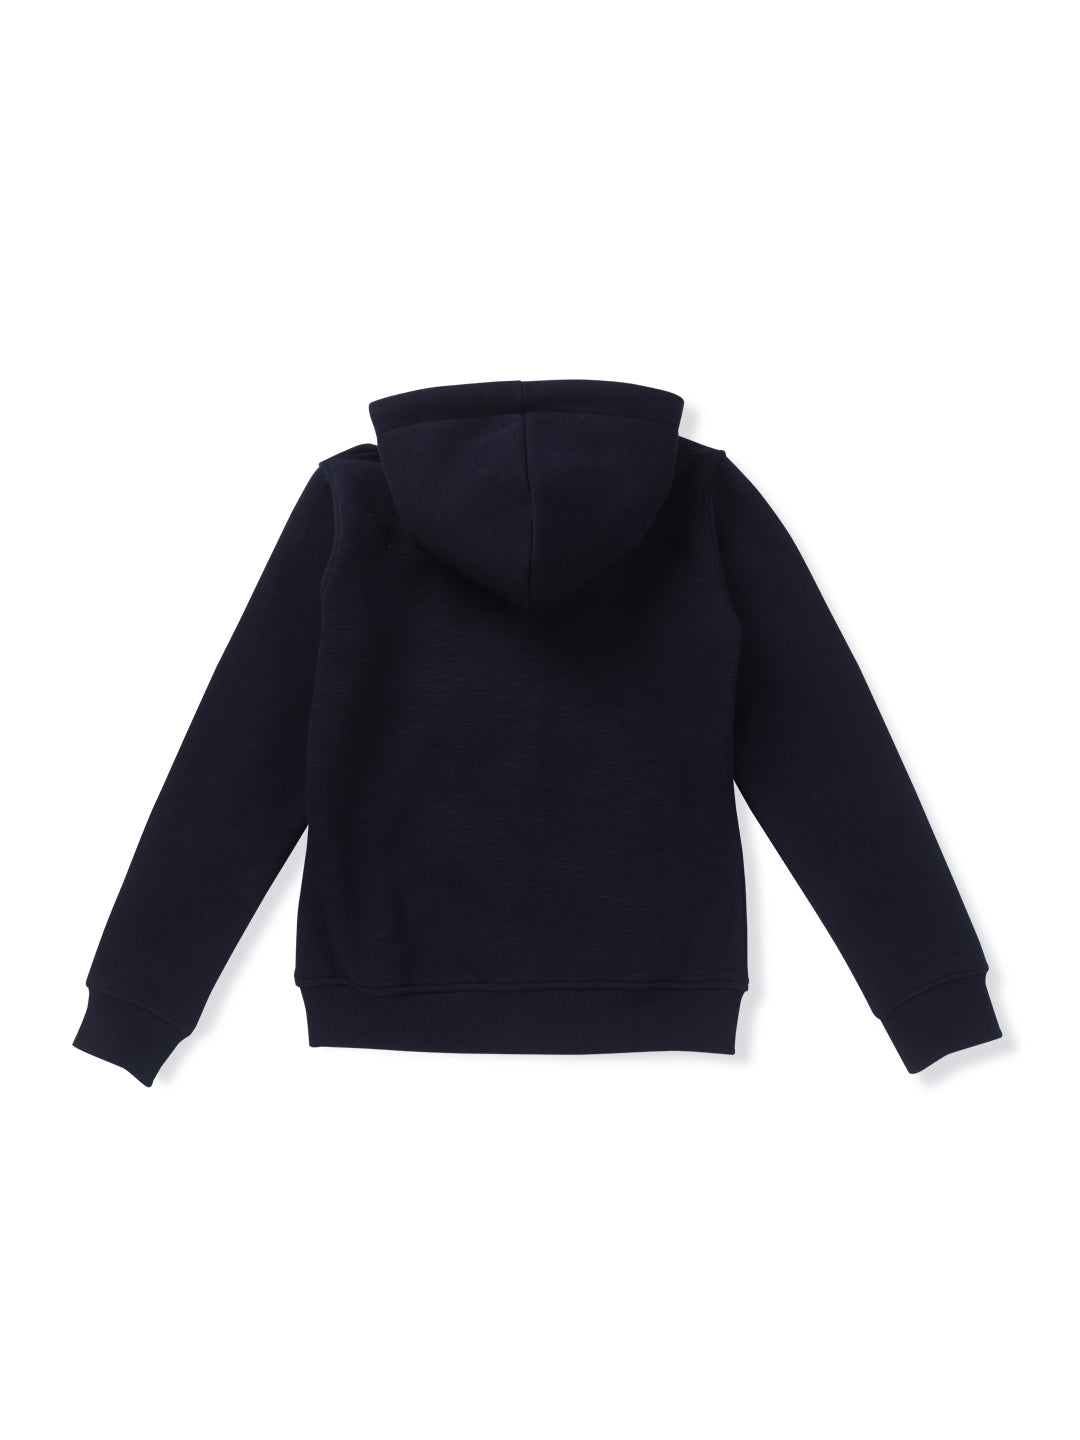 Girls Navy Blue Embroidered Woven Knits Jacket